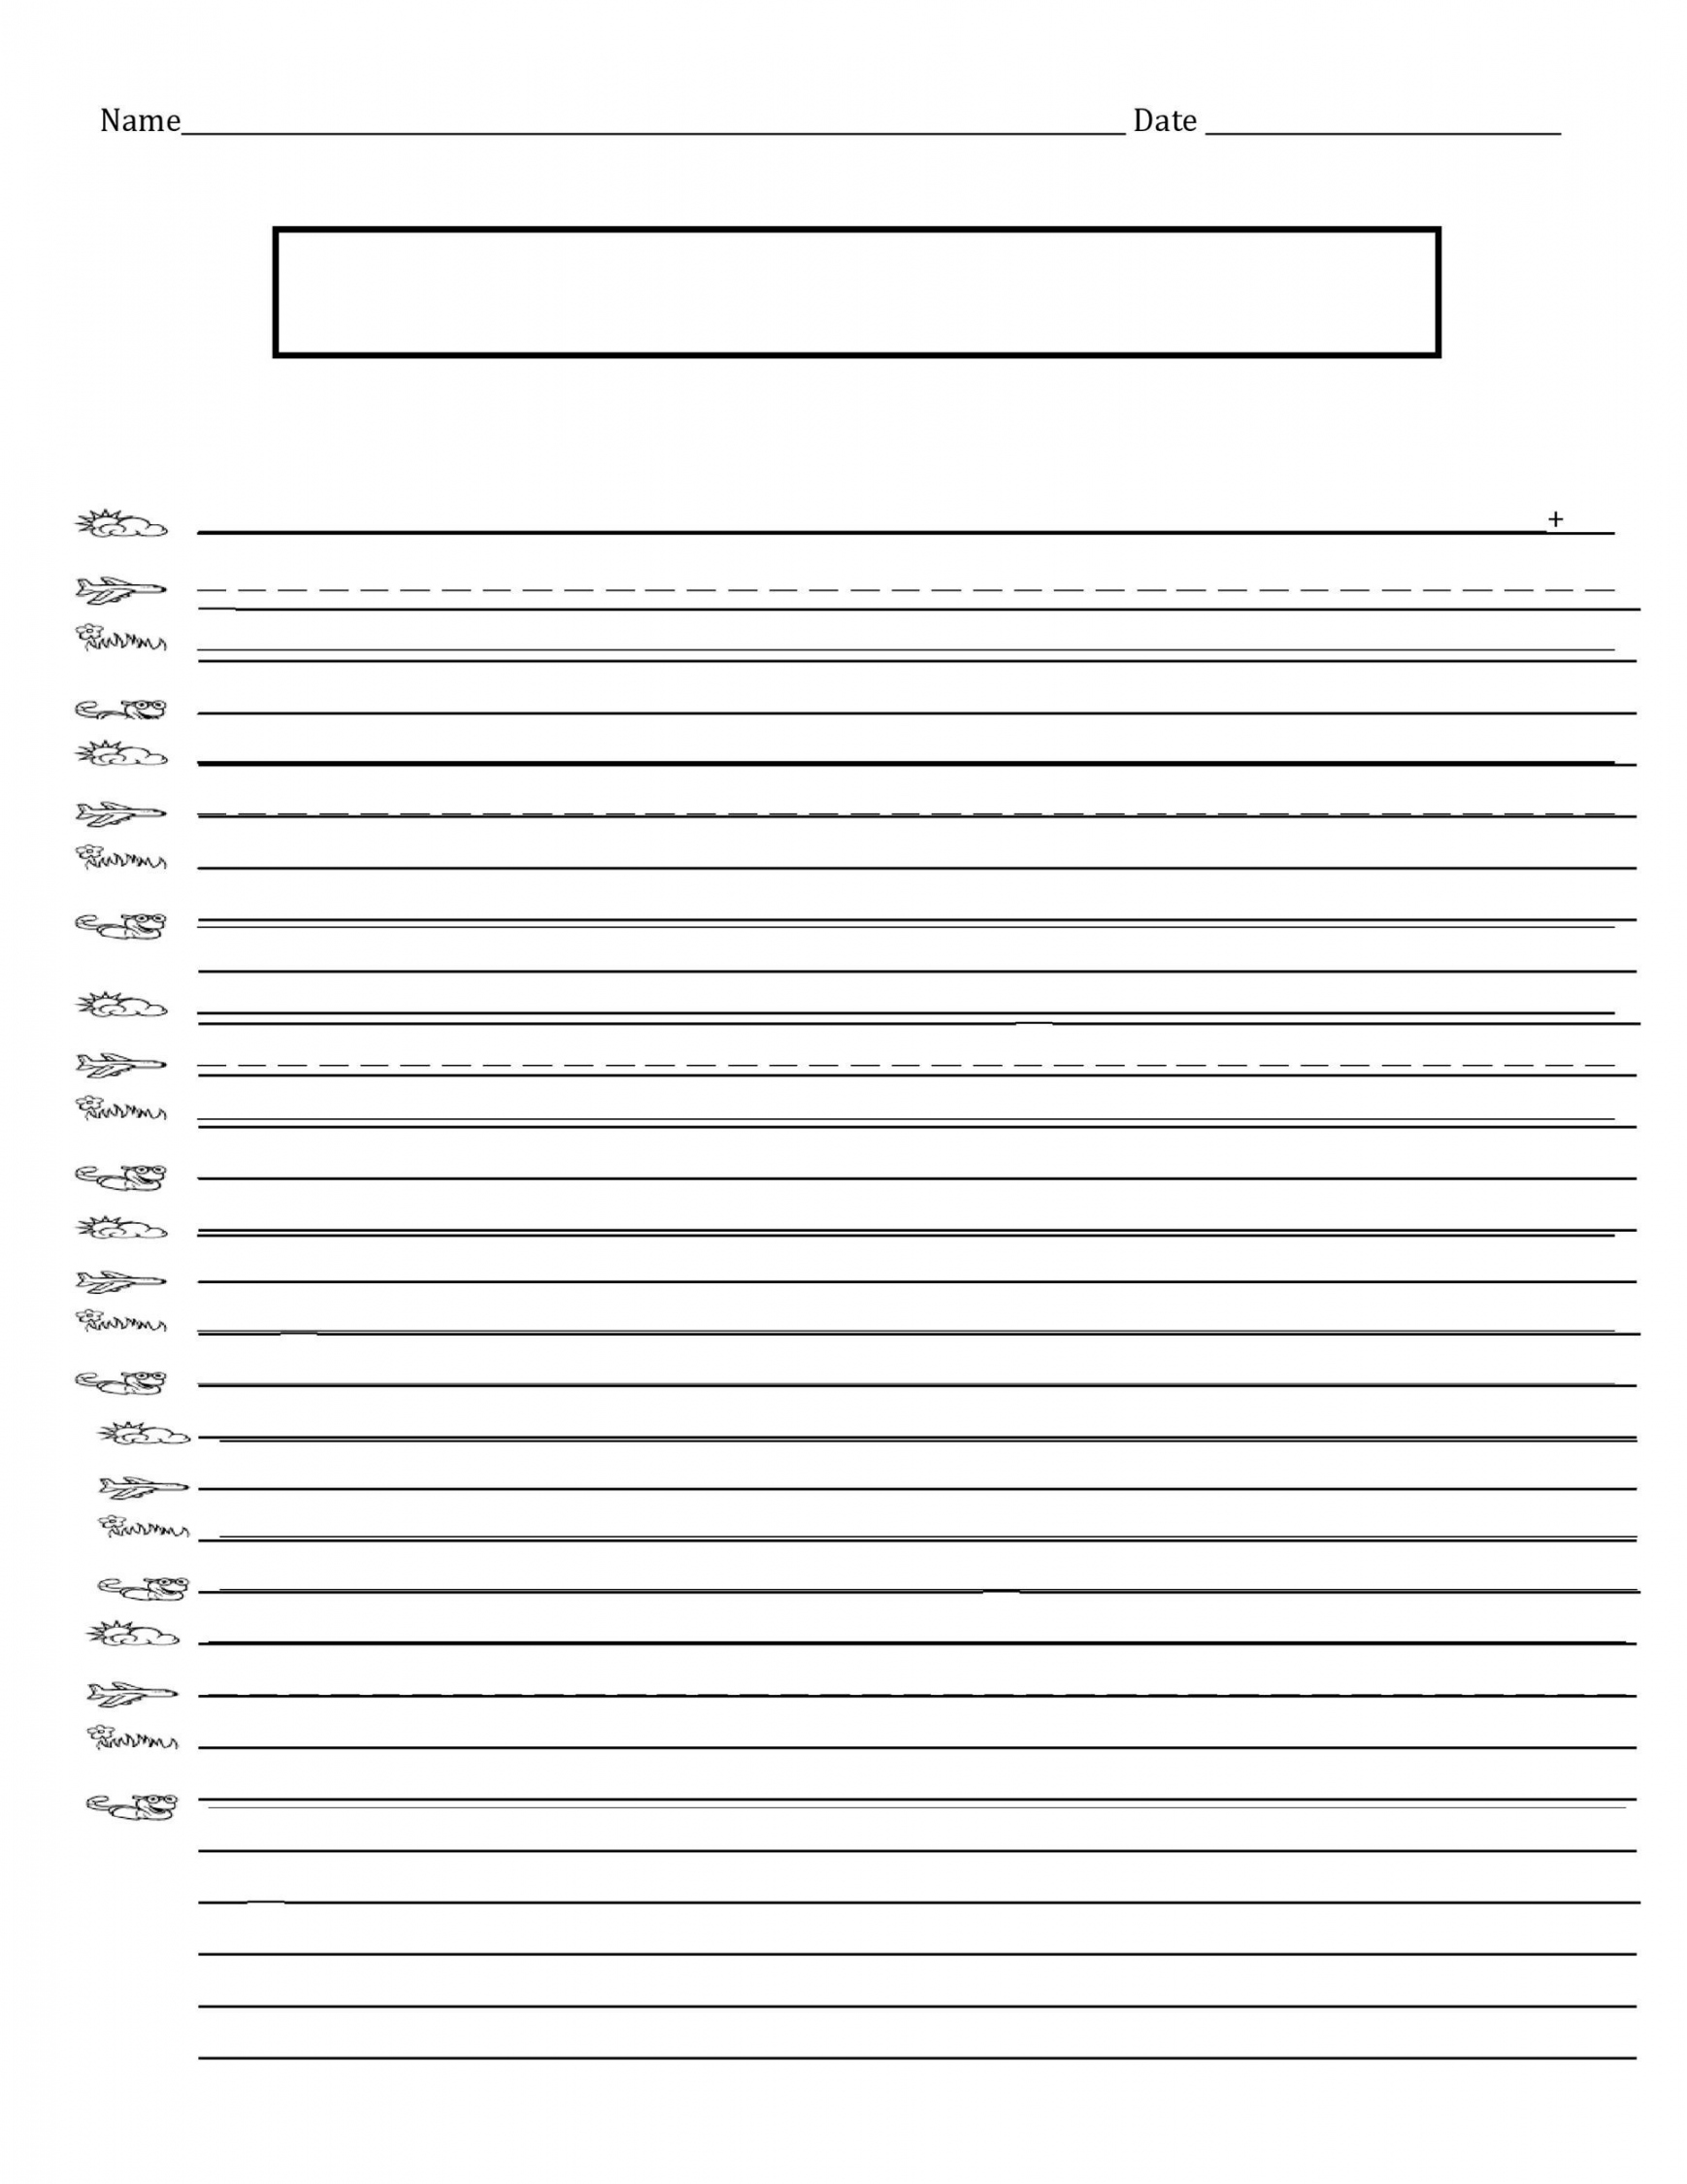 Printable Lined Paper Templates ᐅ TemplateLab - FREE Printables - Handwriting Lined Paper Printable